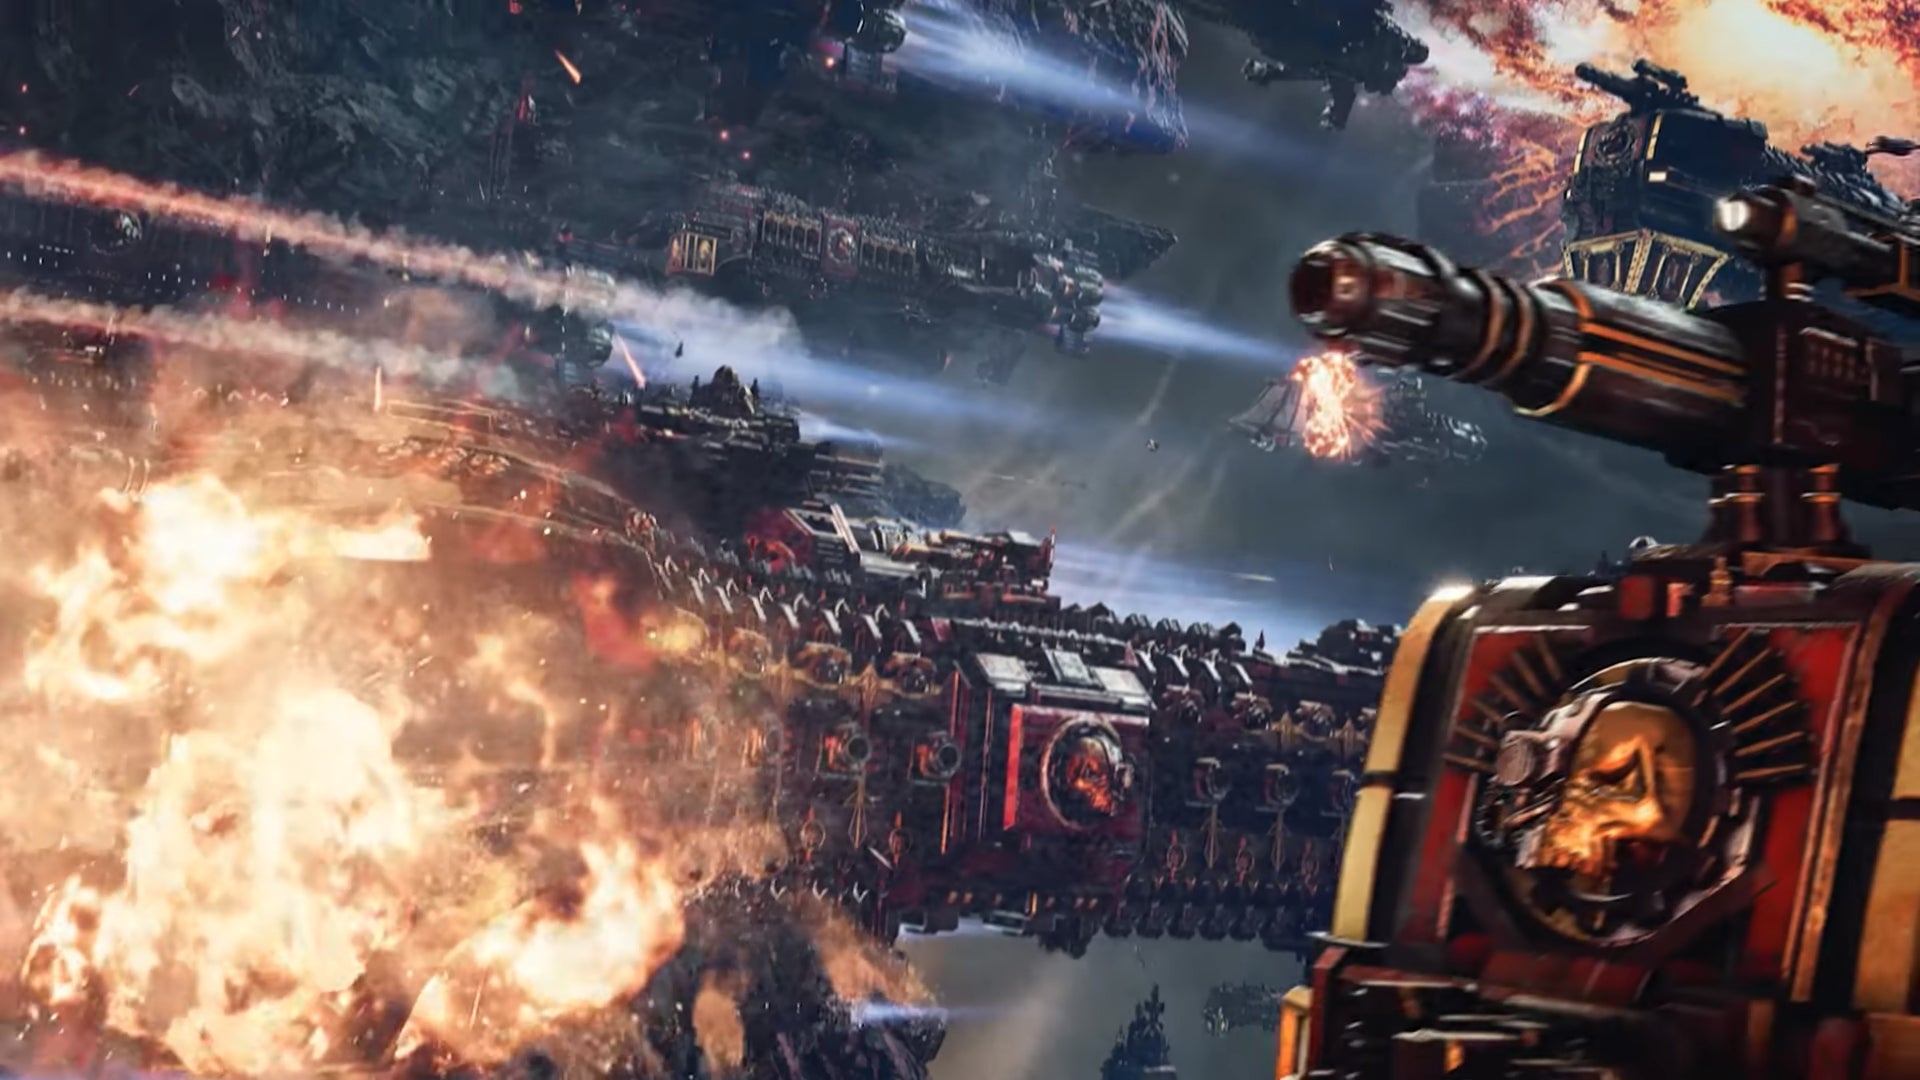 Image for Battlefleet Gothic: Armada 2 announced, includes all 12 factions from the tabletop game